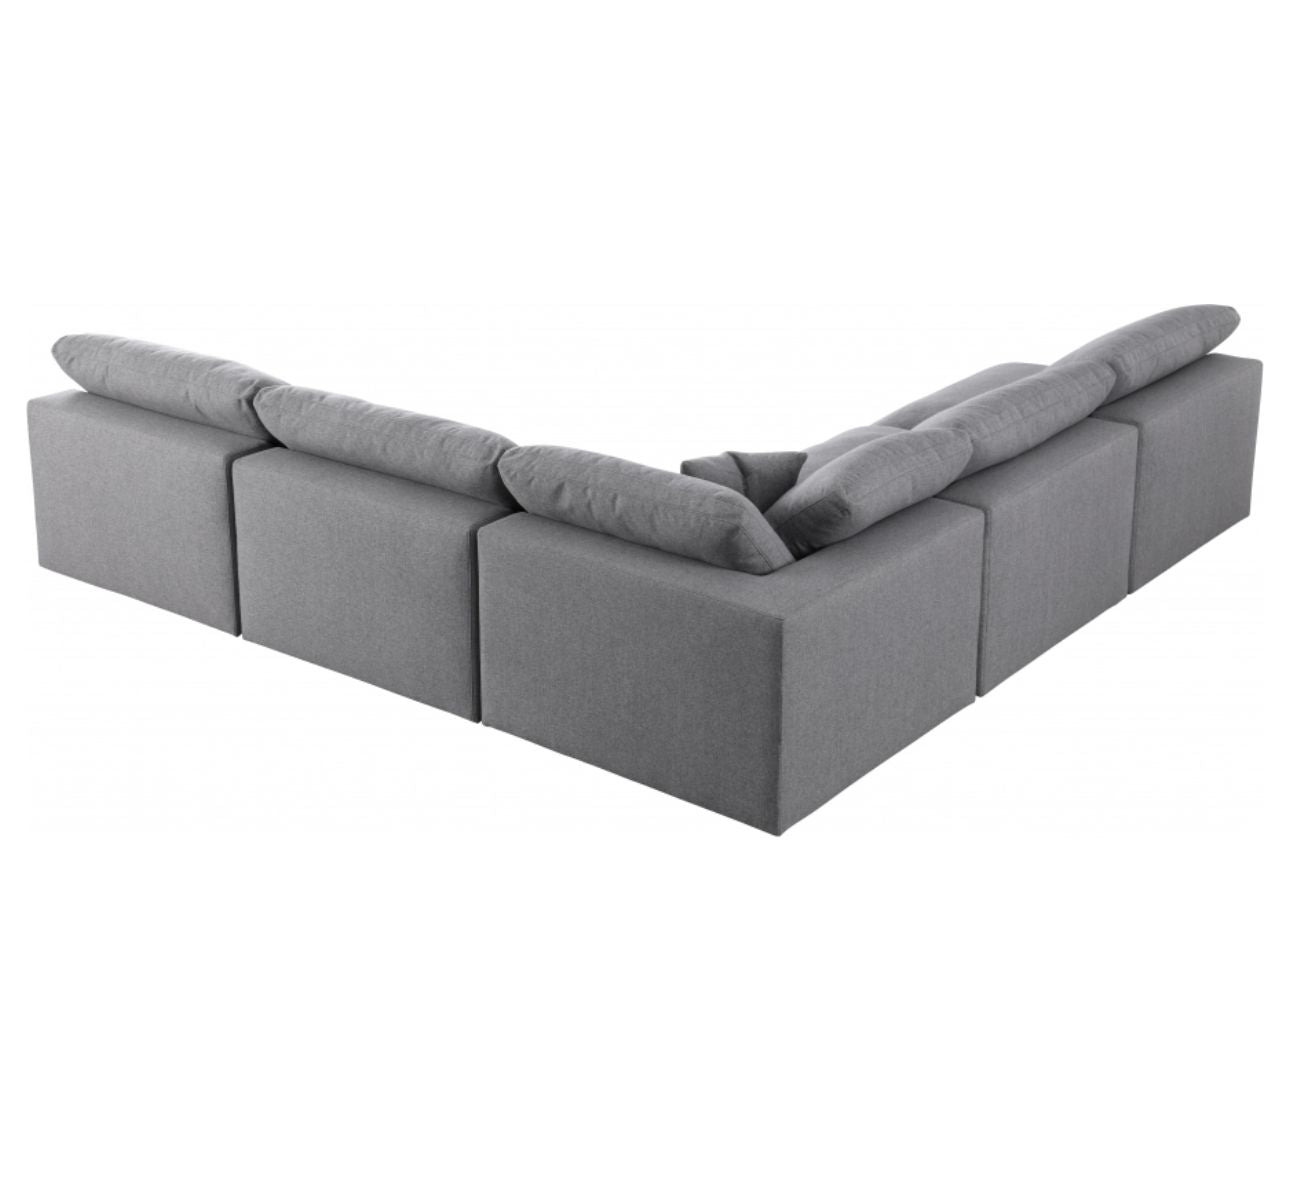 Open Box! Meridian Serene Deluxe Cloud  5 Piece Modular Sectional Sofa-Free Delivery